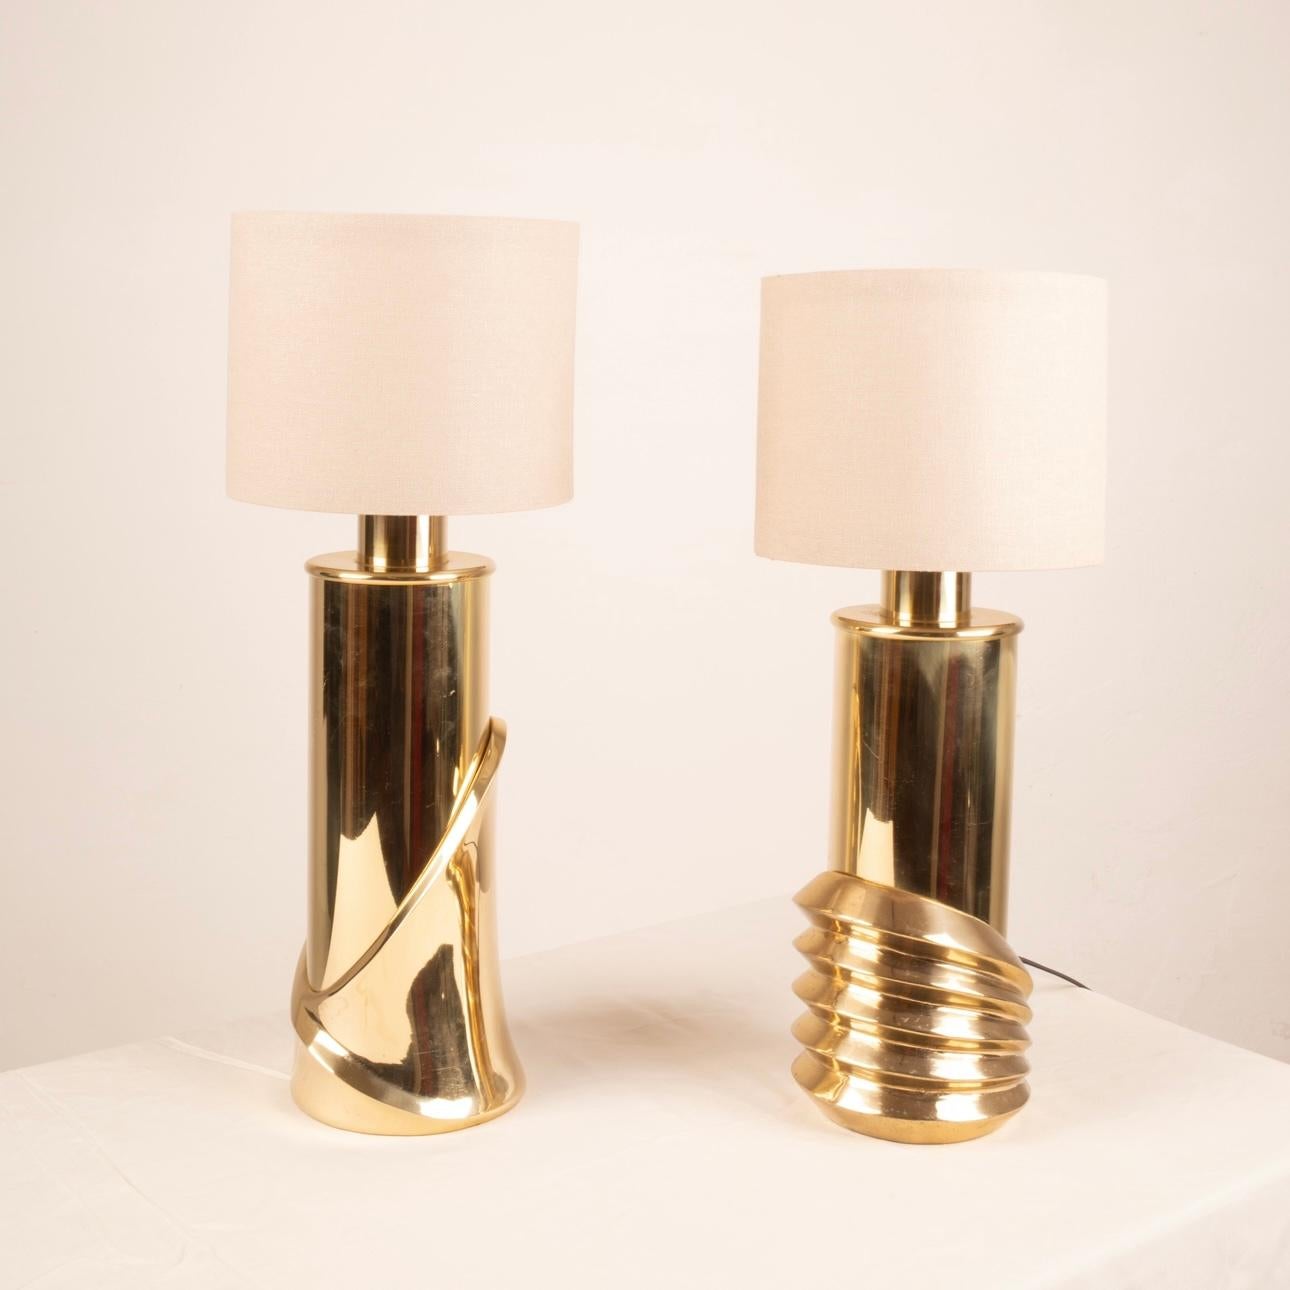 Italian Pair of Brass Lamps by Luciano Frigerio for Frigerio of Desio For Sale